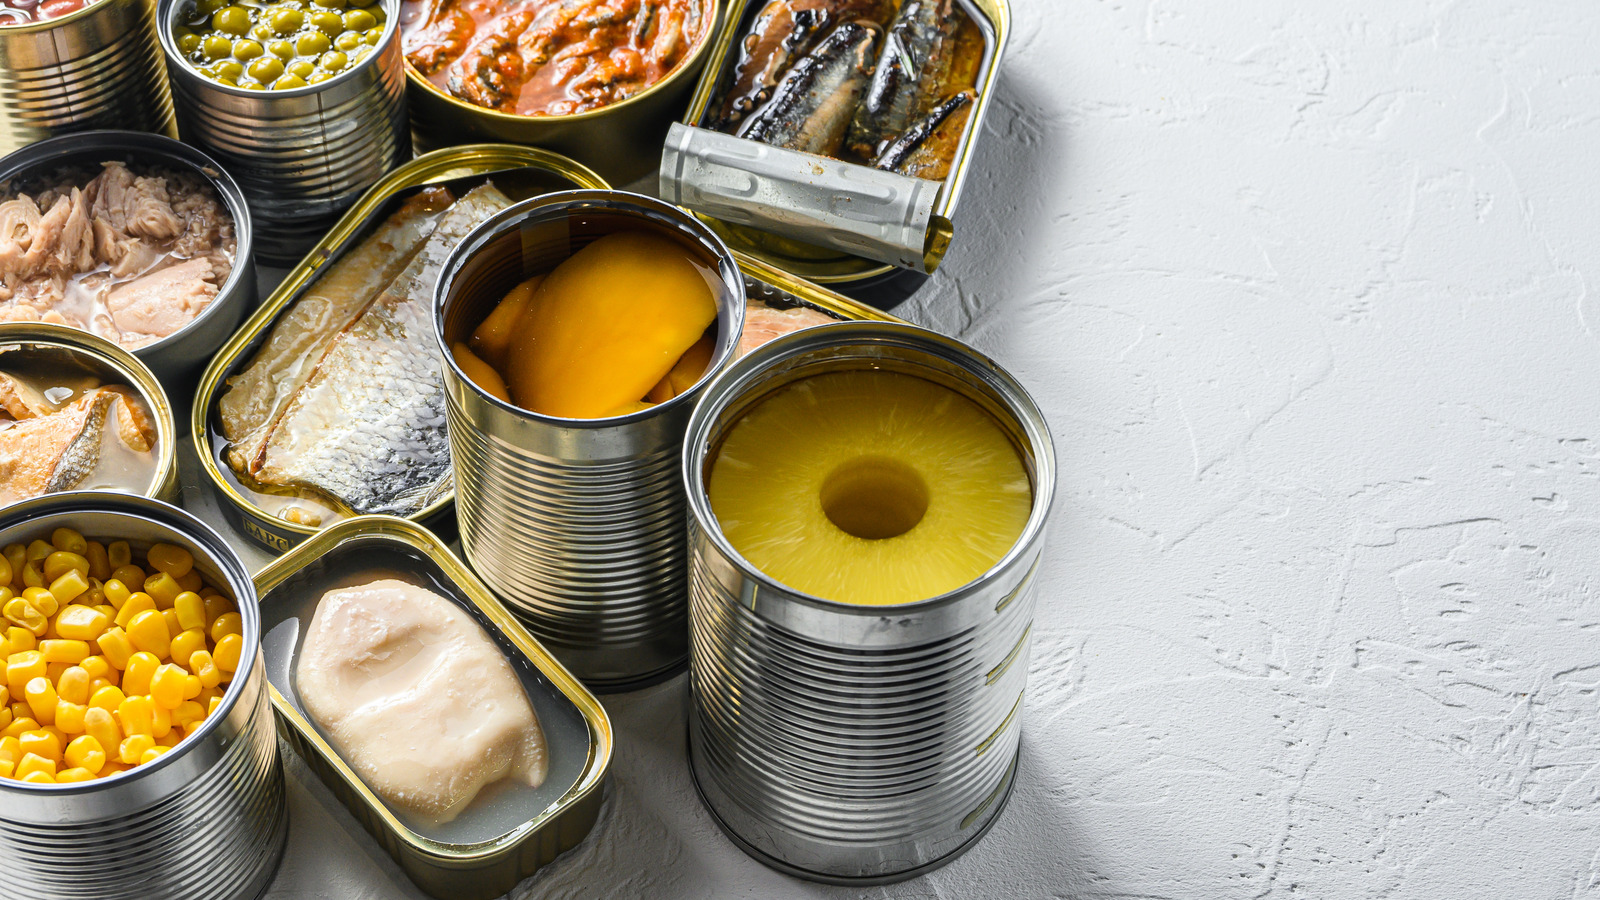 How Do They Make Canned Food? Healthy Food Guide | atelier-yuwa.ciao.jp